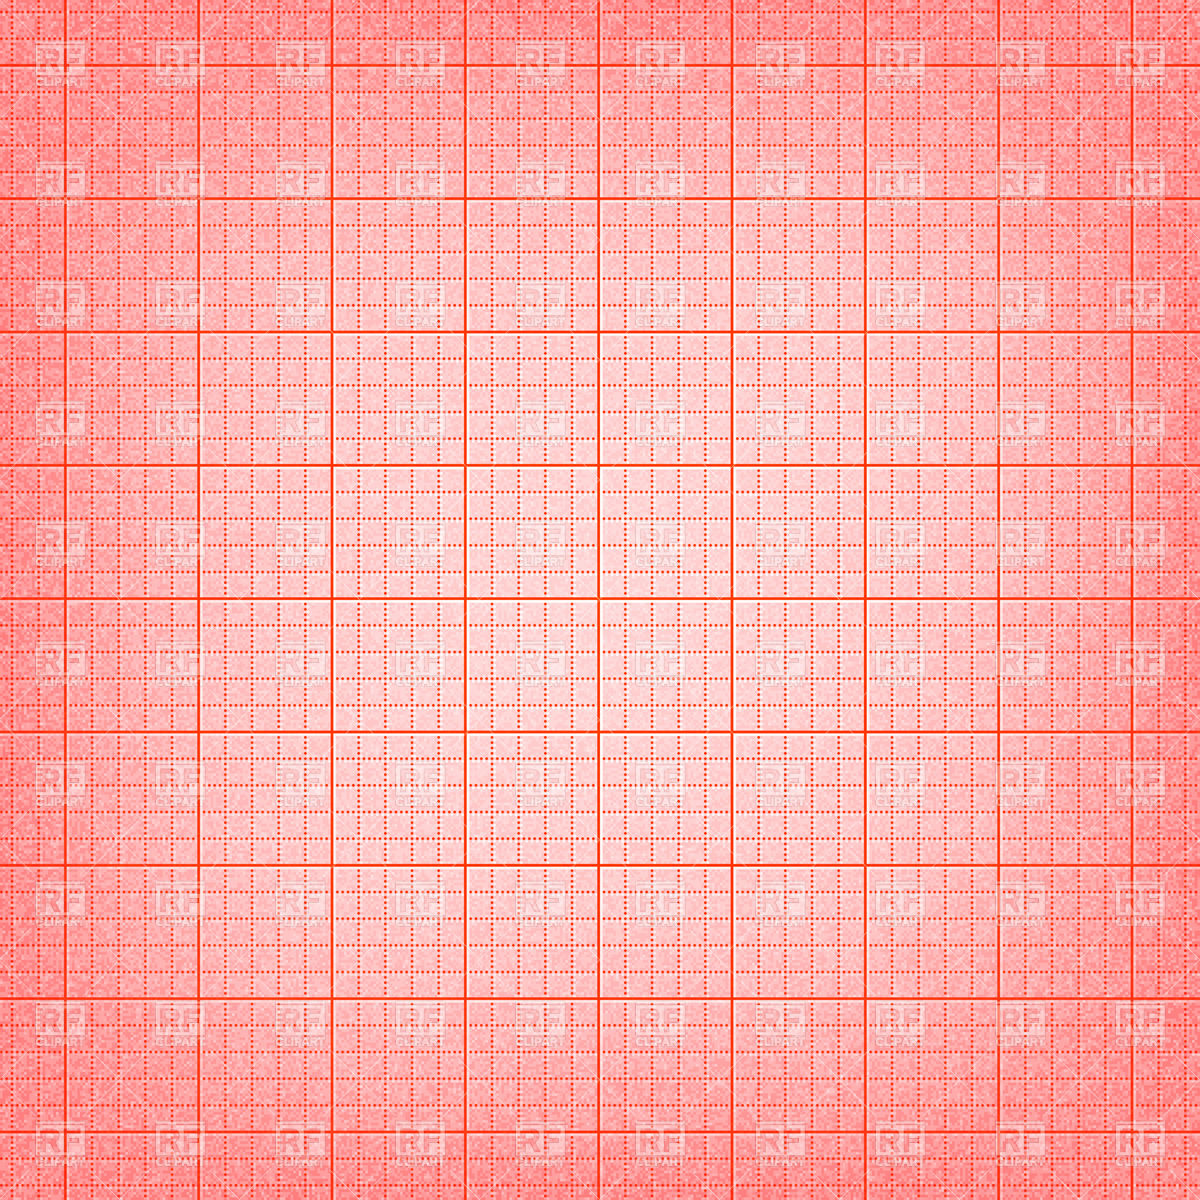 Free Vector Graph Paper At Collection Of Free Vector